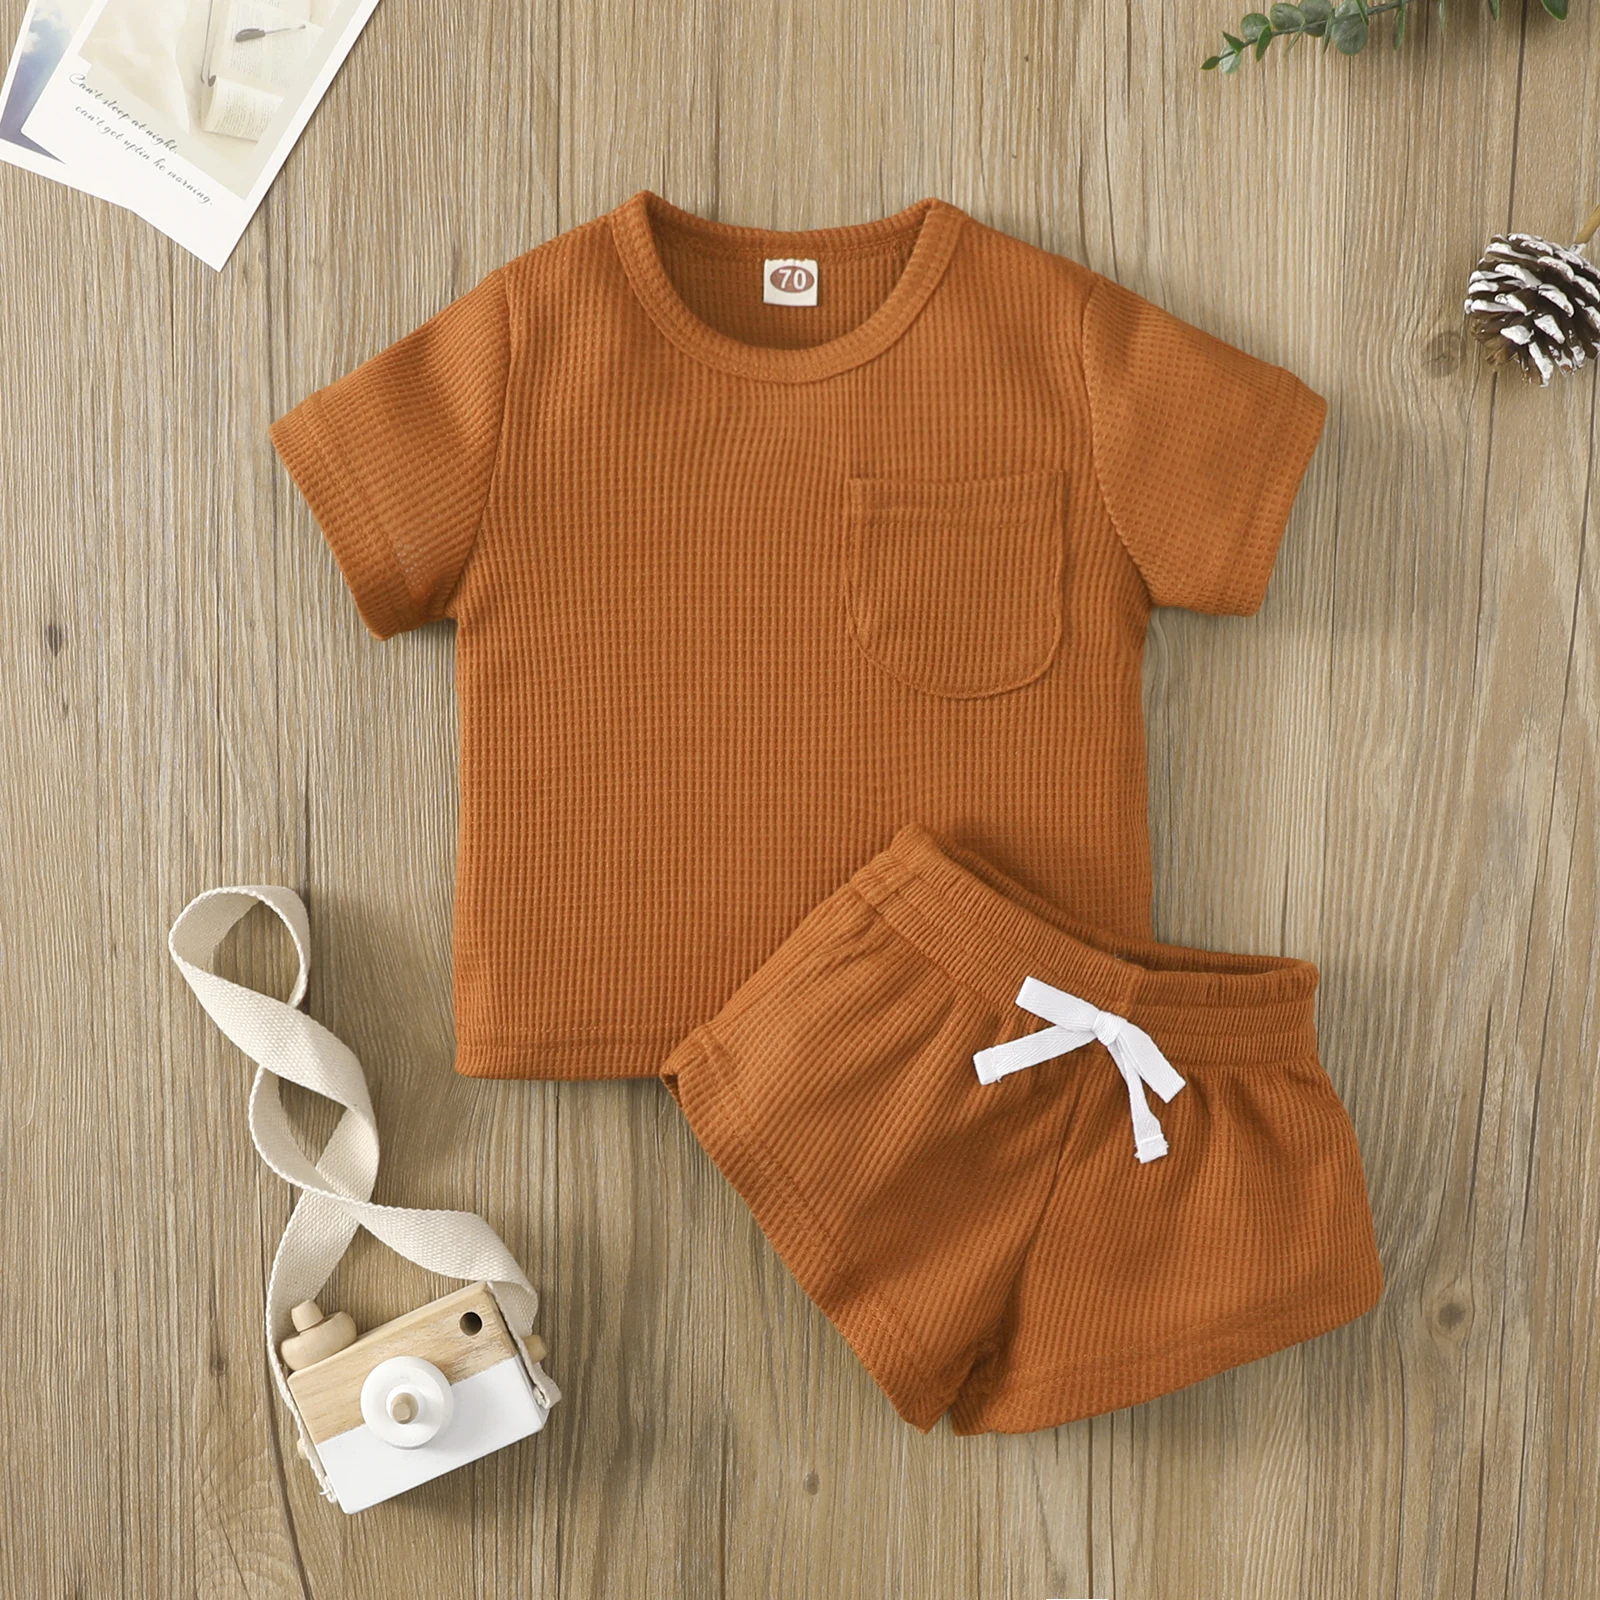 newborn baby clothing set Ma&Baby 0-3Years Toddler Infant Baby Boy Girl Clothes Set Button Short Sleeve T shirt Shorts Summer Outfits Costumes D35 vintage Baby Clothing Set